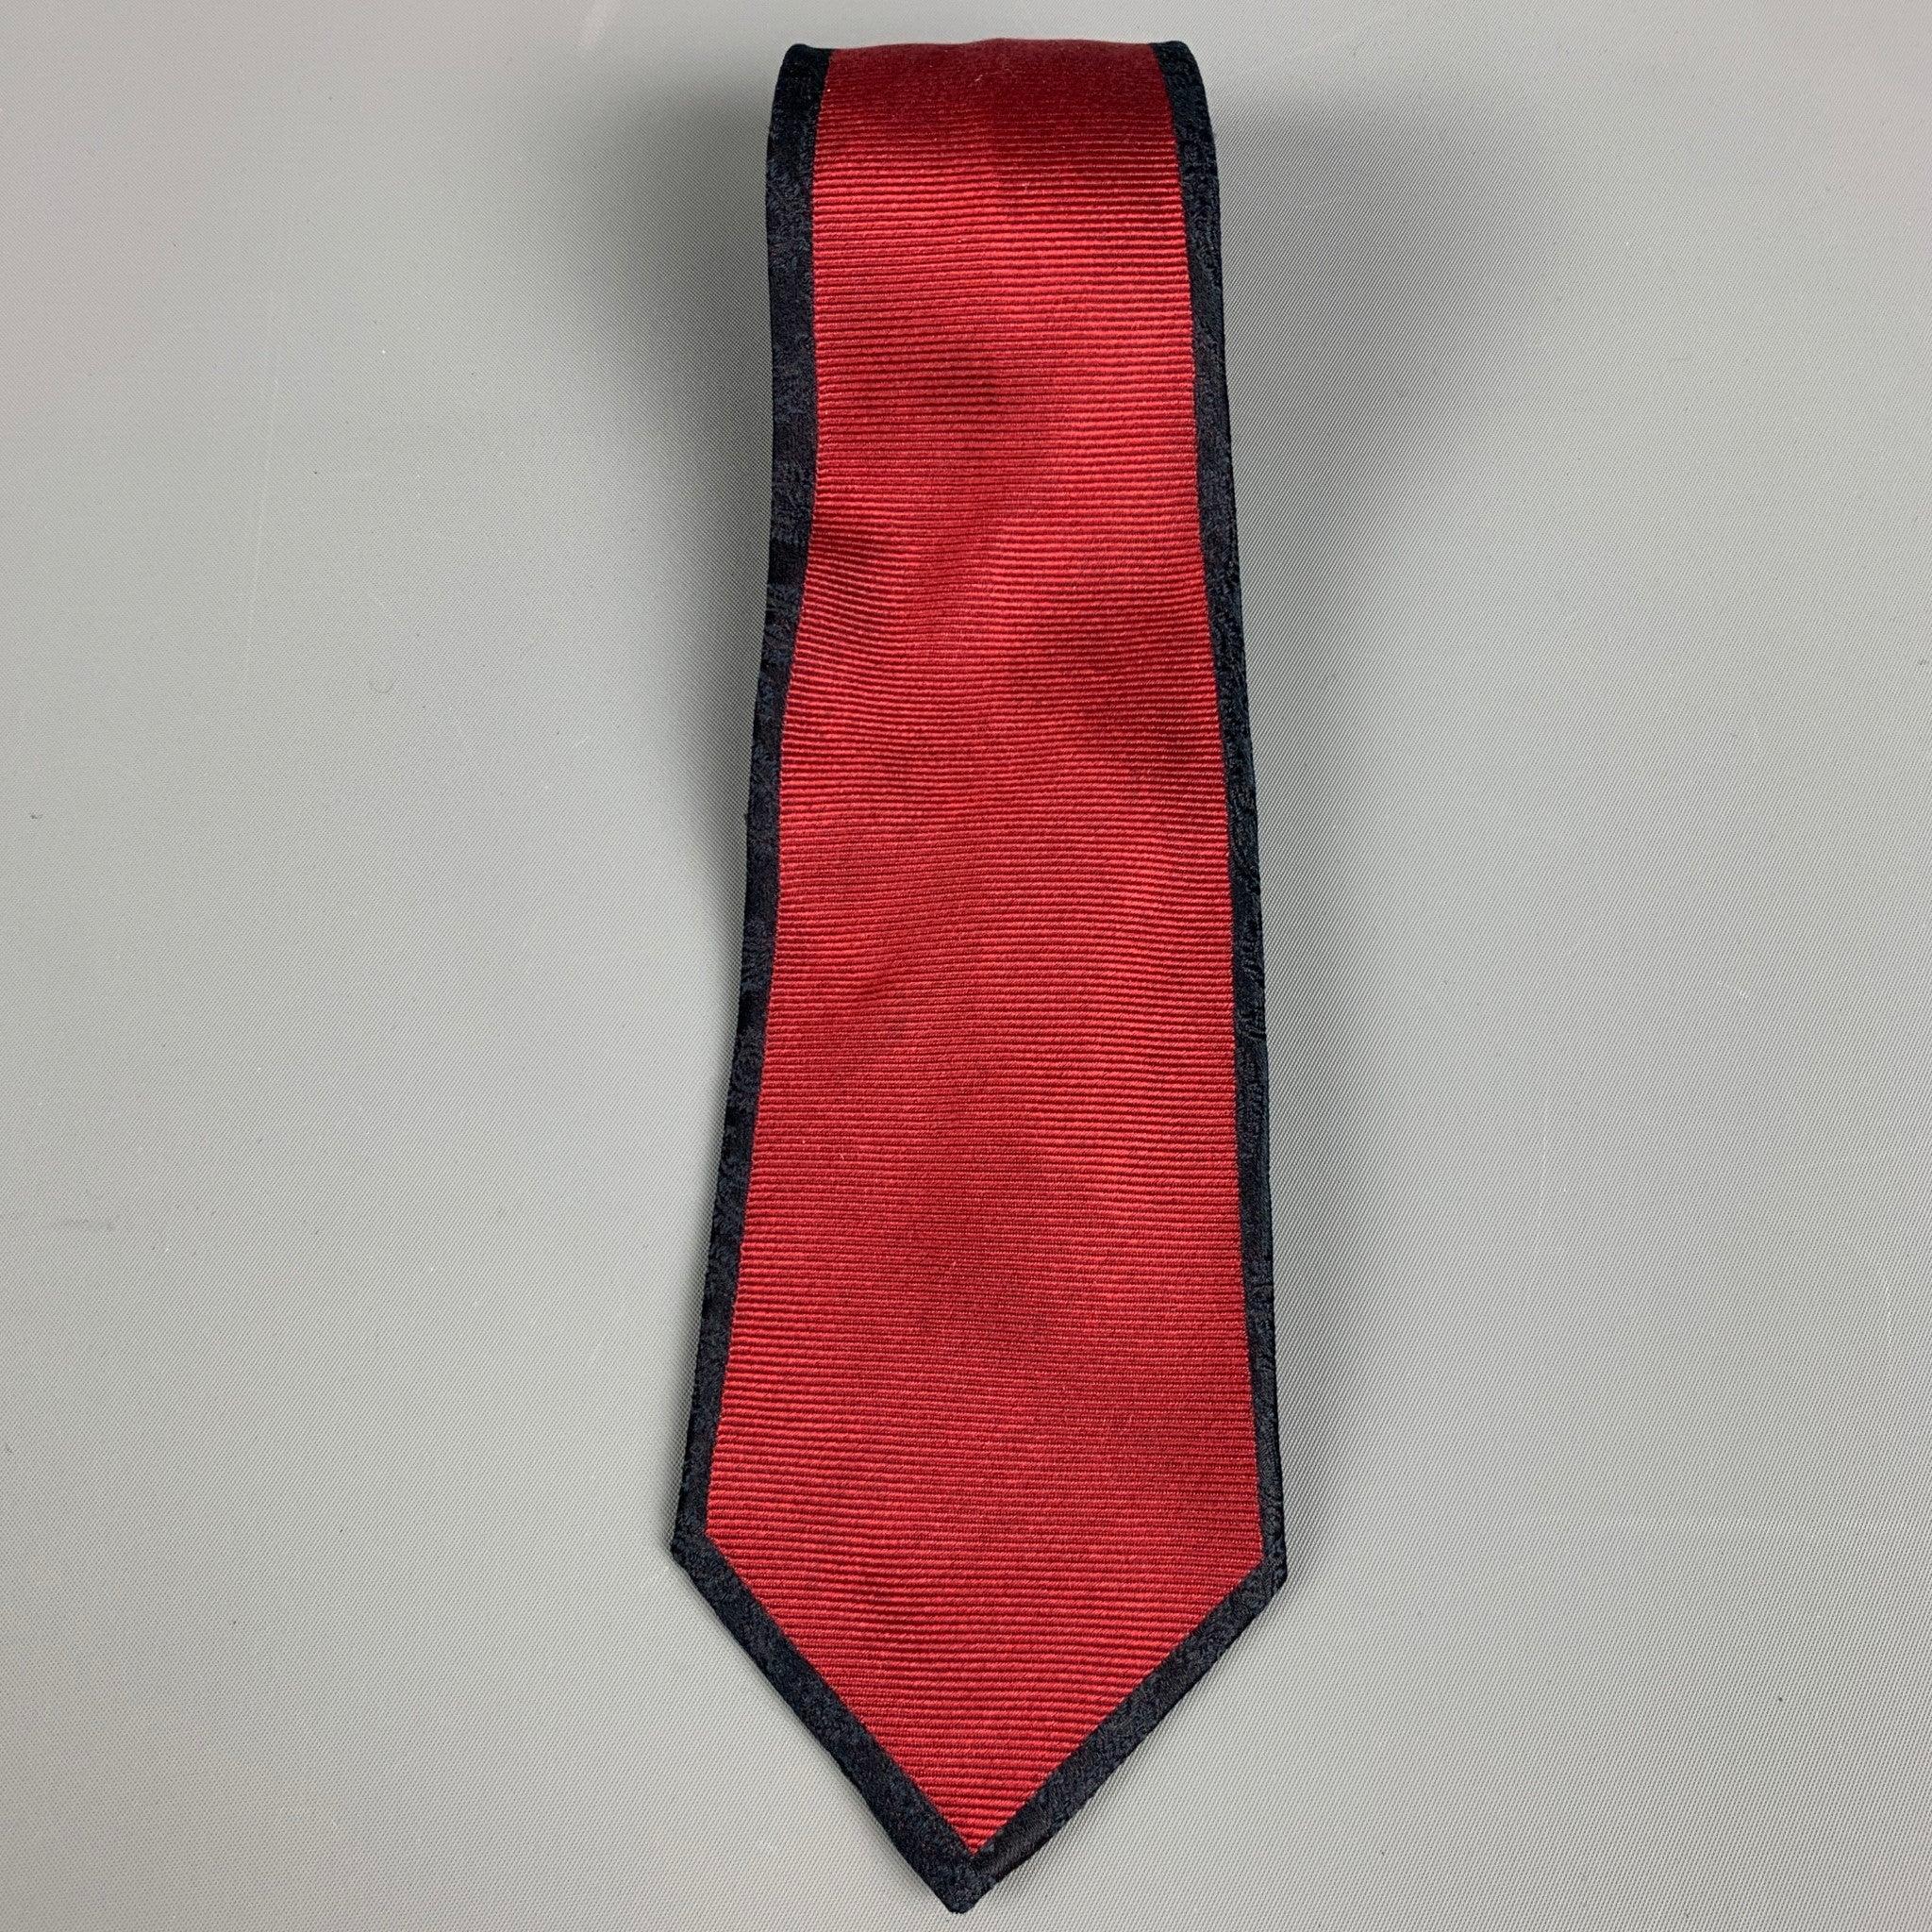 MILA SCHON
necktie in a silk fabric featuring a red jacquard center and black paisley pattern edges. Made in Italy.Excellent Pre-Owned Condition. 

Measurements: 
  Width: 3 inches Length: 57 inches 
  
  
 
Reference: 127997
Category: Tie
More